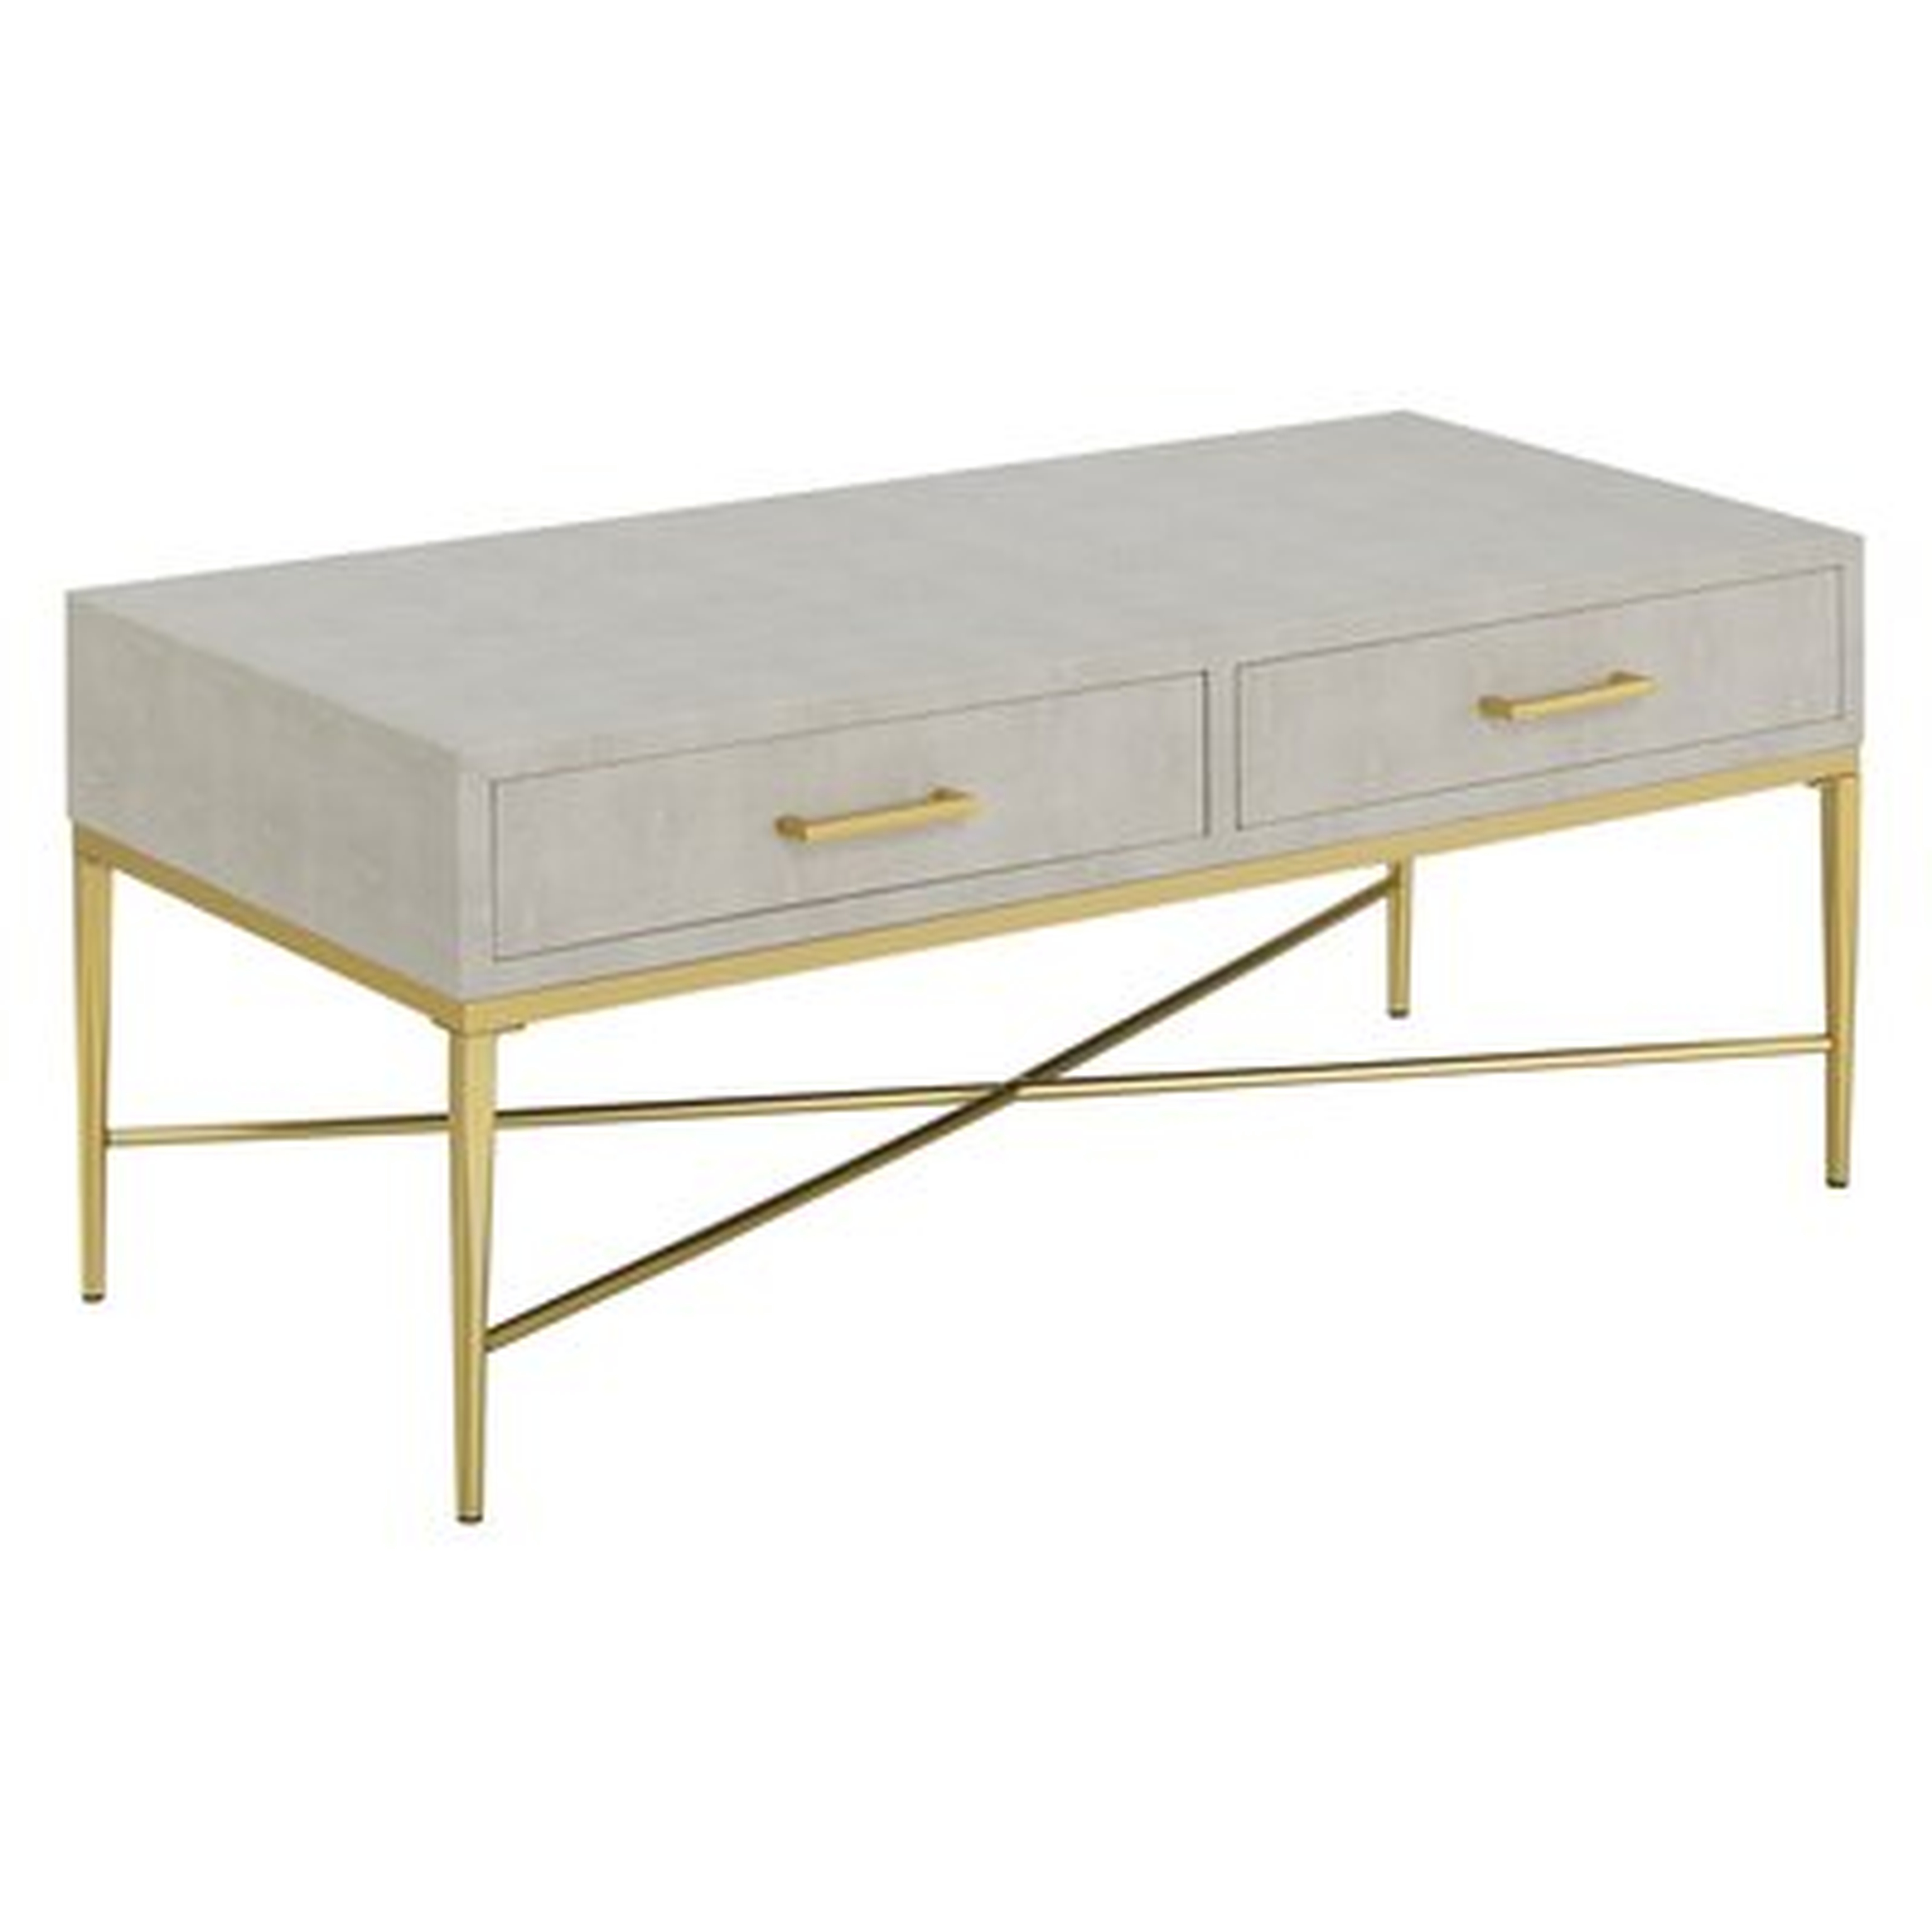 Hesson Cross Legs Coffee Table with Storage - AllModern